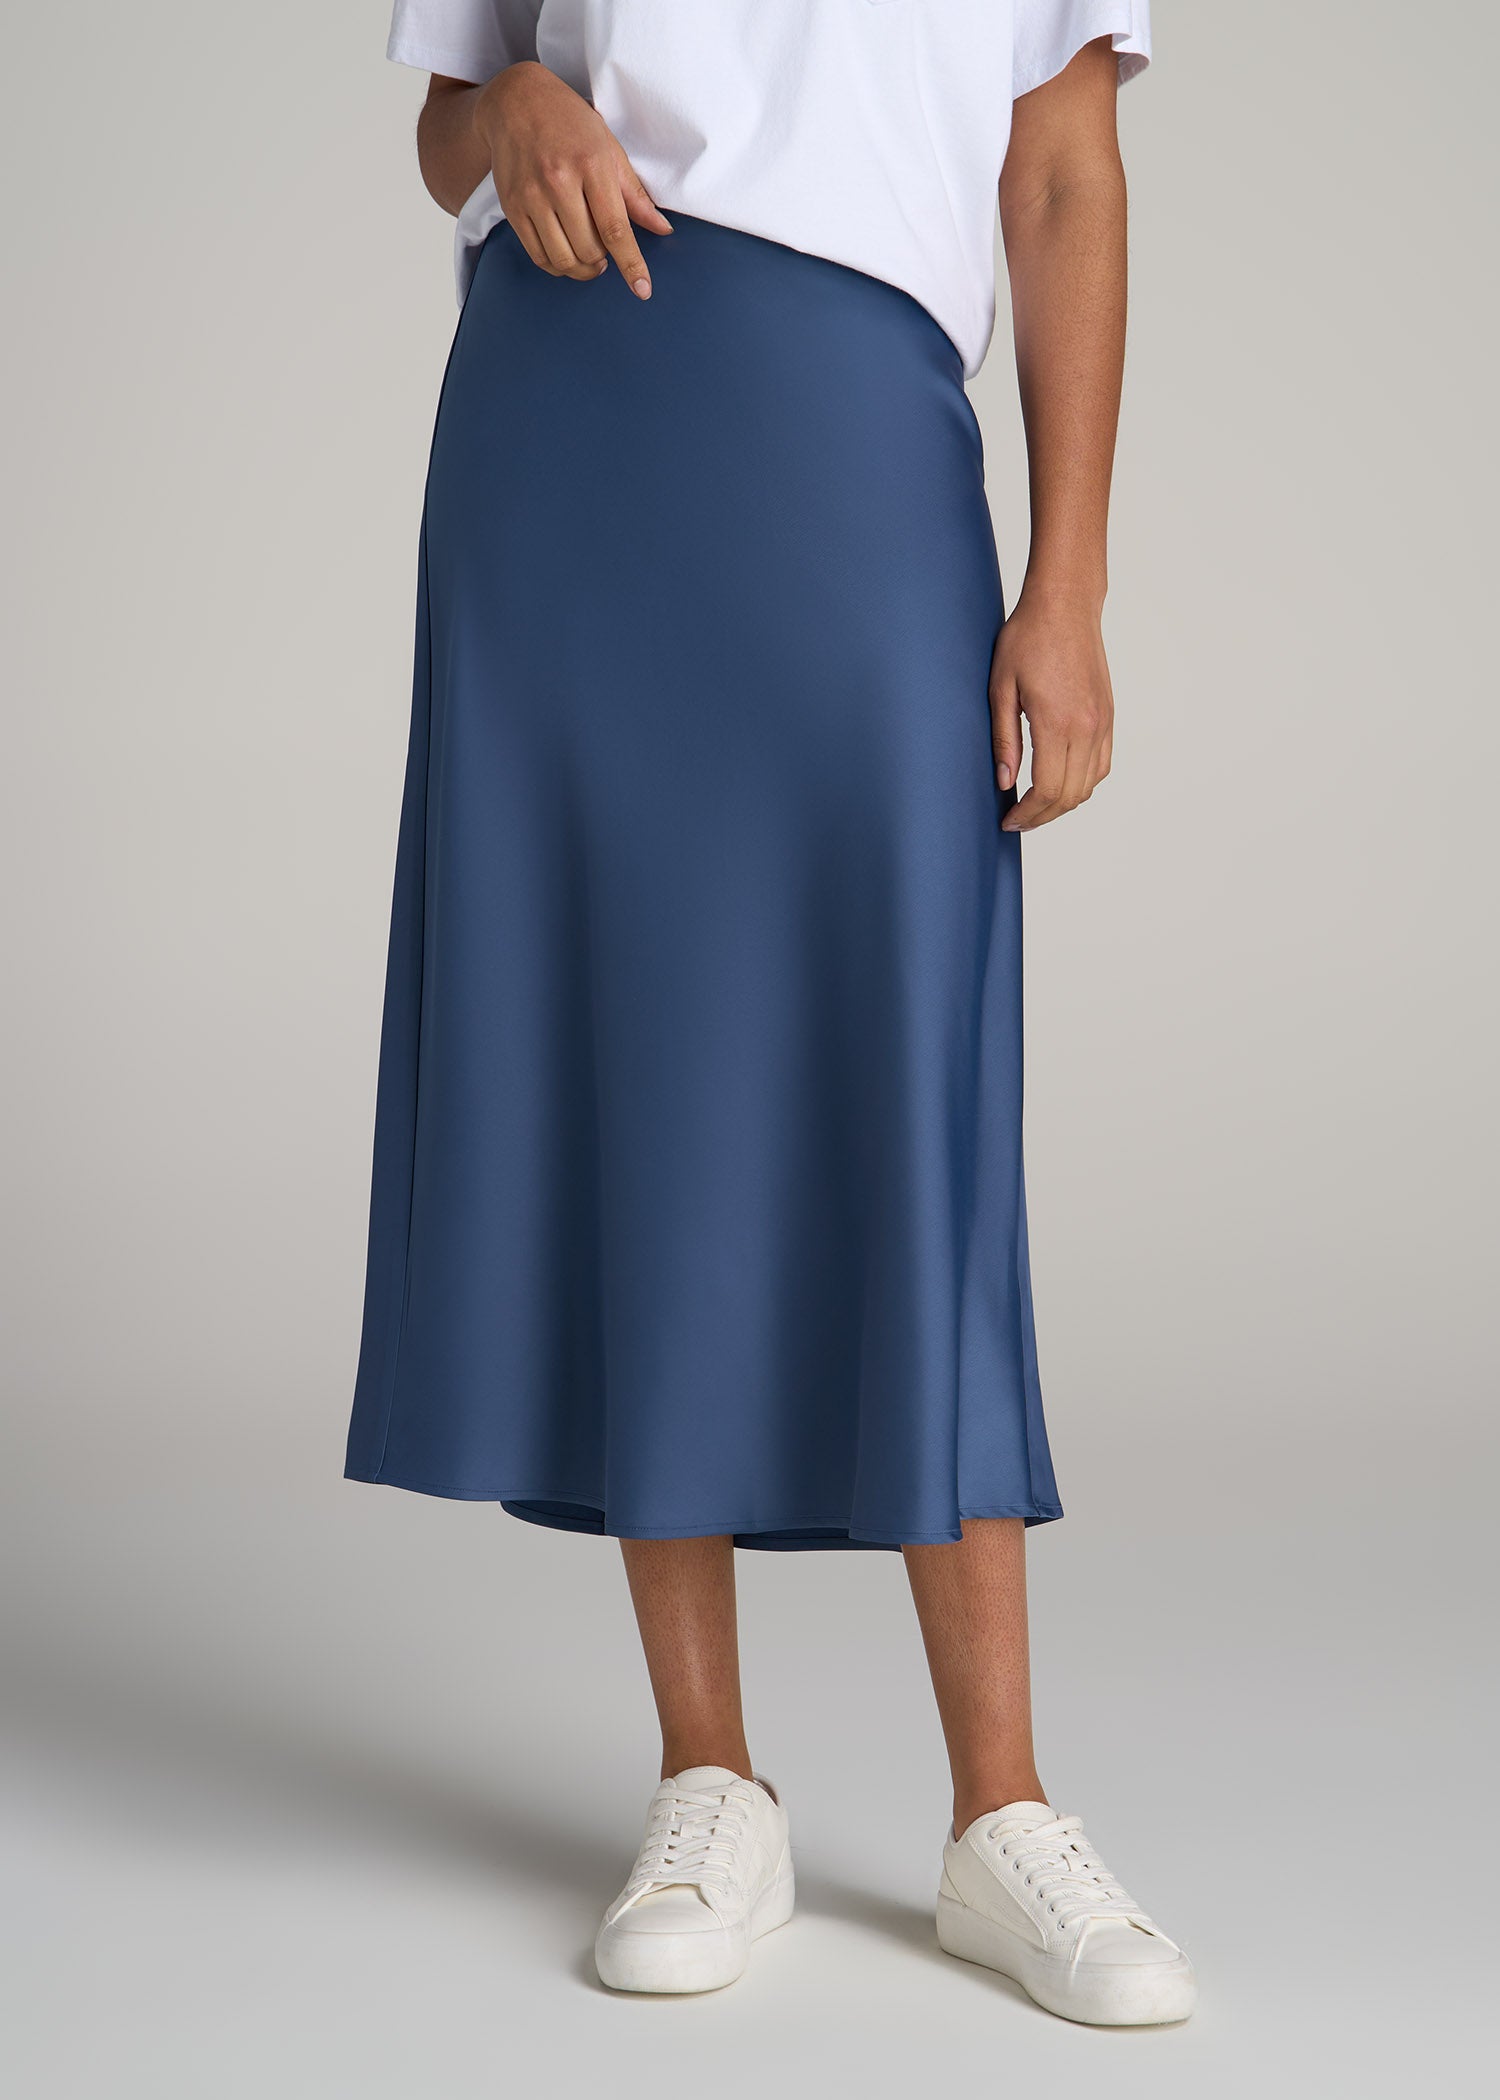 pull-on A-line skirt